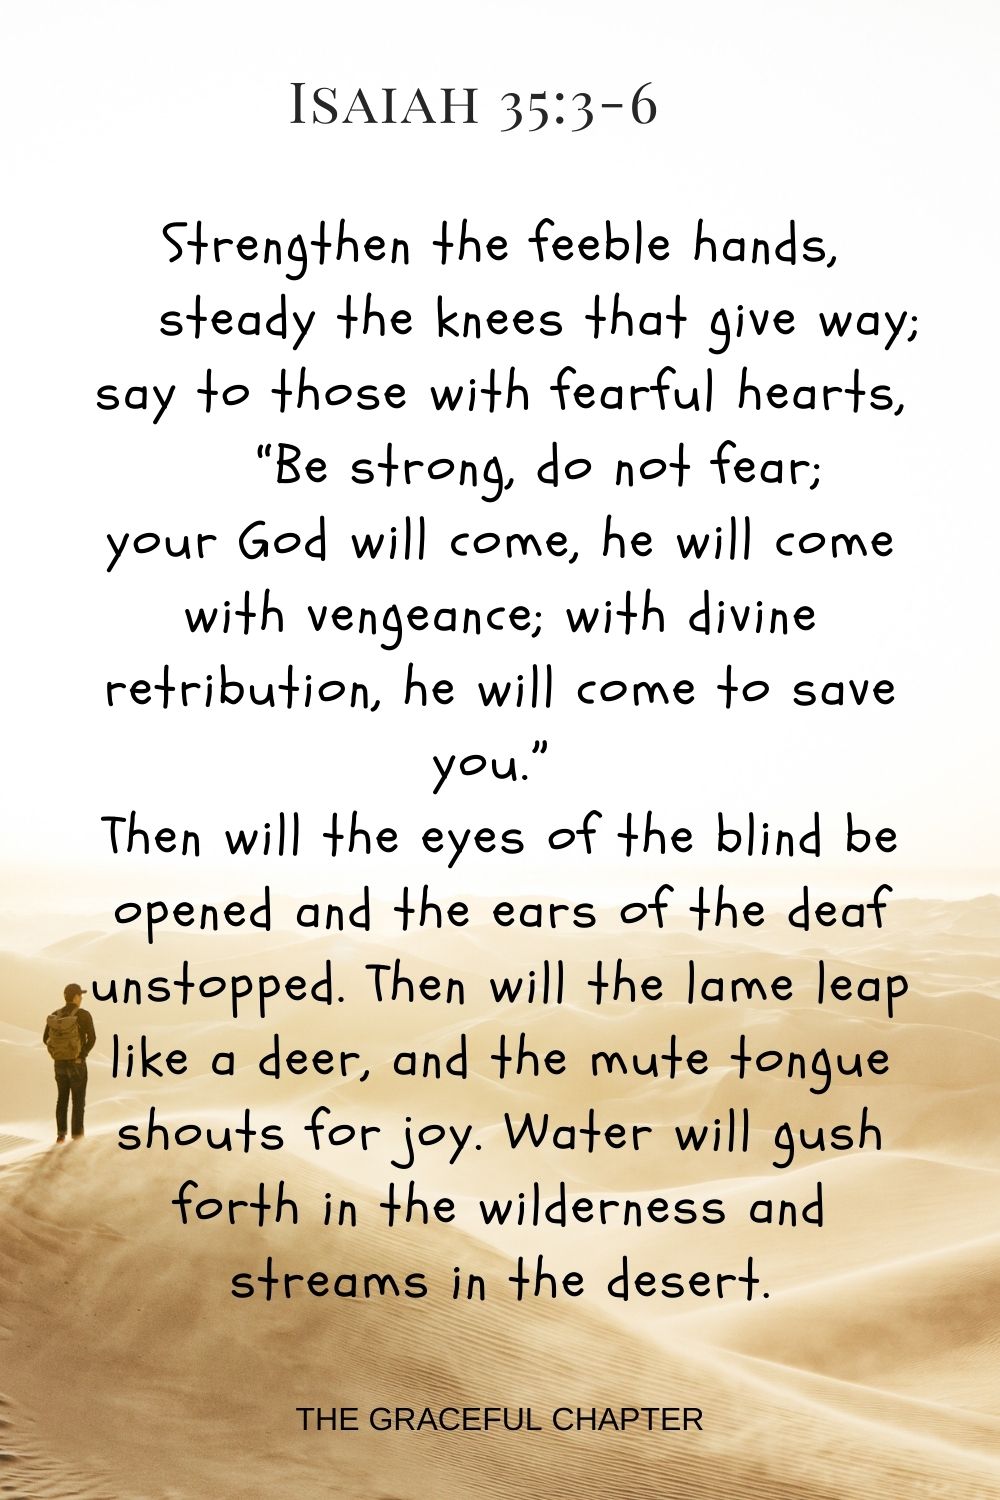 Strengthen the feeble hands, steady the knees that give way; say to those with fearful hearts, “Be strong, do not fear; your God will come, he will come with vengeance; with divine retribution, he will come to save you.” Then will the eyes of the blind be opened and the ears of the deaf unstopped. Then will the lame leap like a deer, and the mute tongue shouts for joy. Water will gush forth in the wilderness and streams in the desert. Isaiah 35:3-6